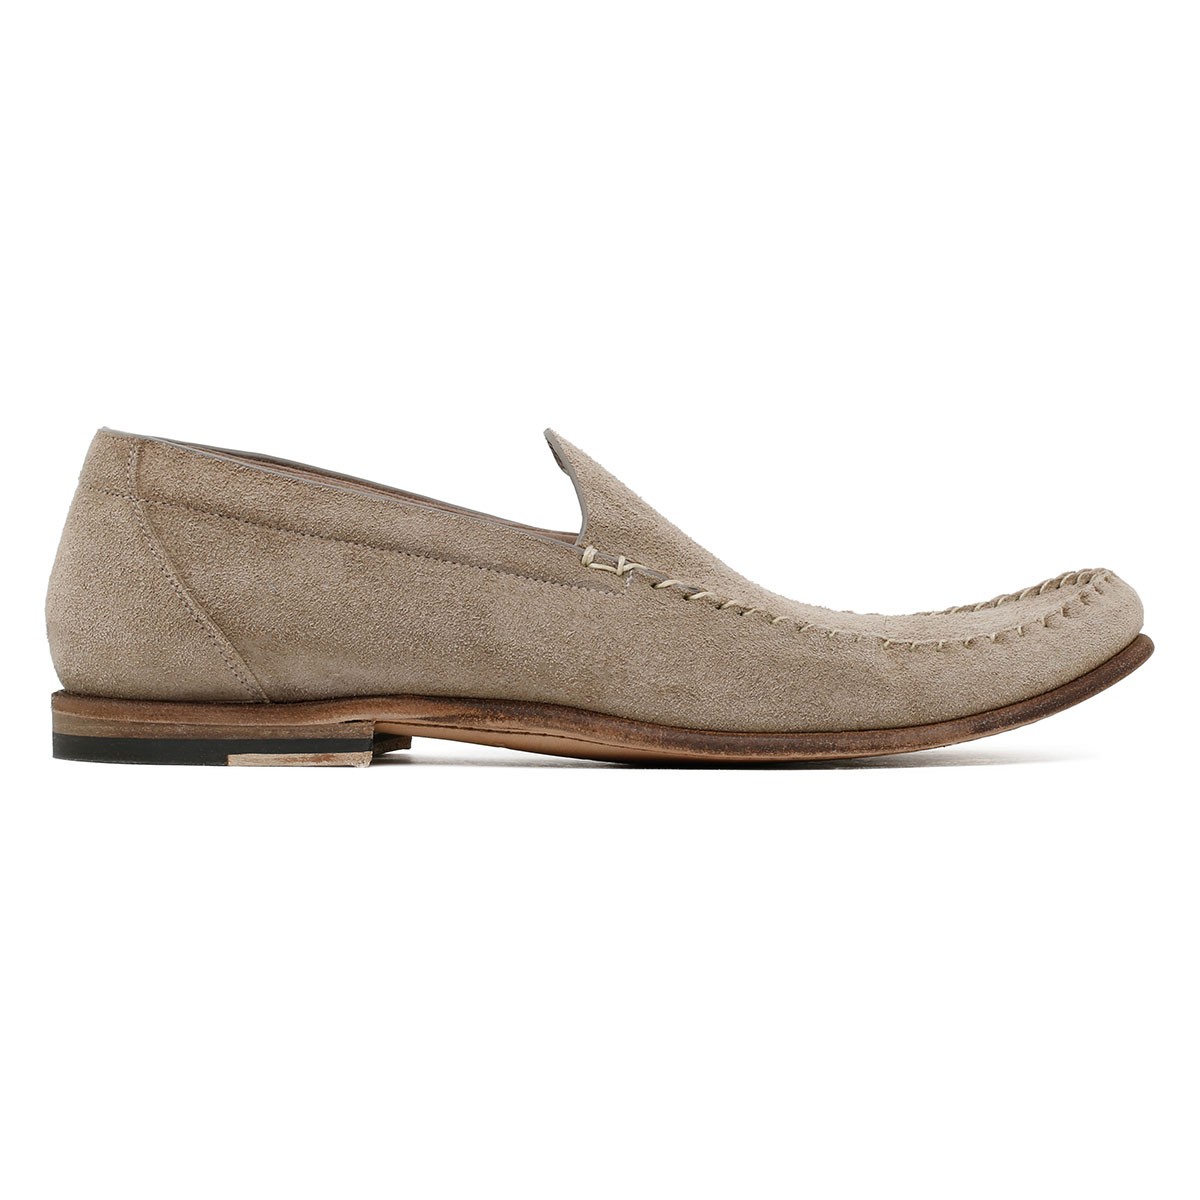 Gray deer leather loafers